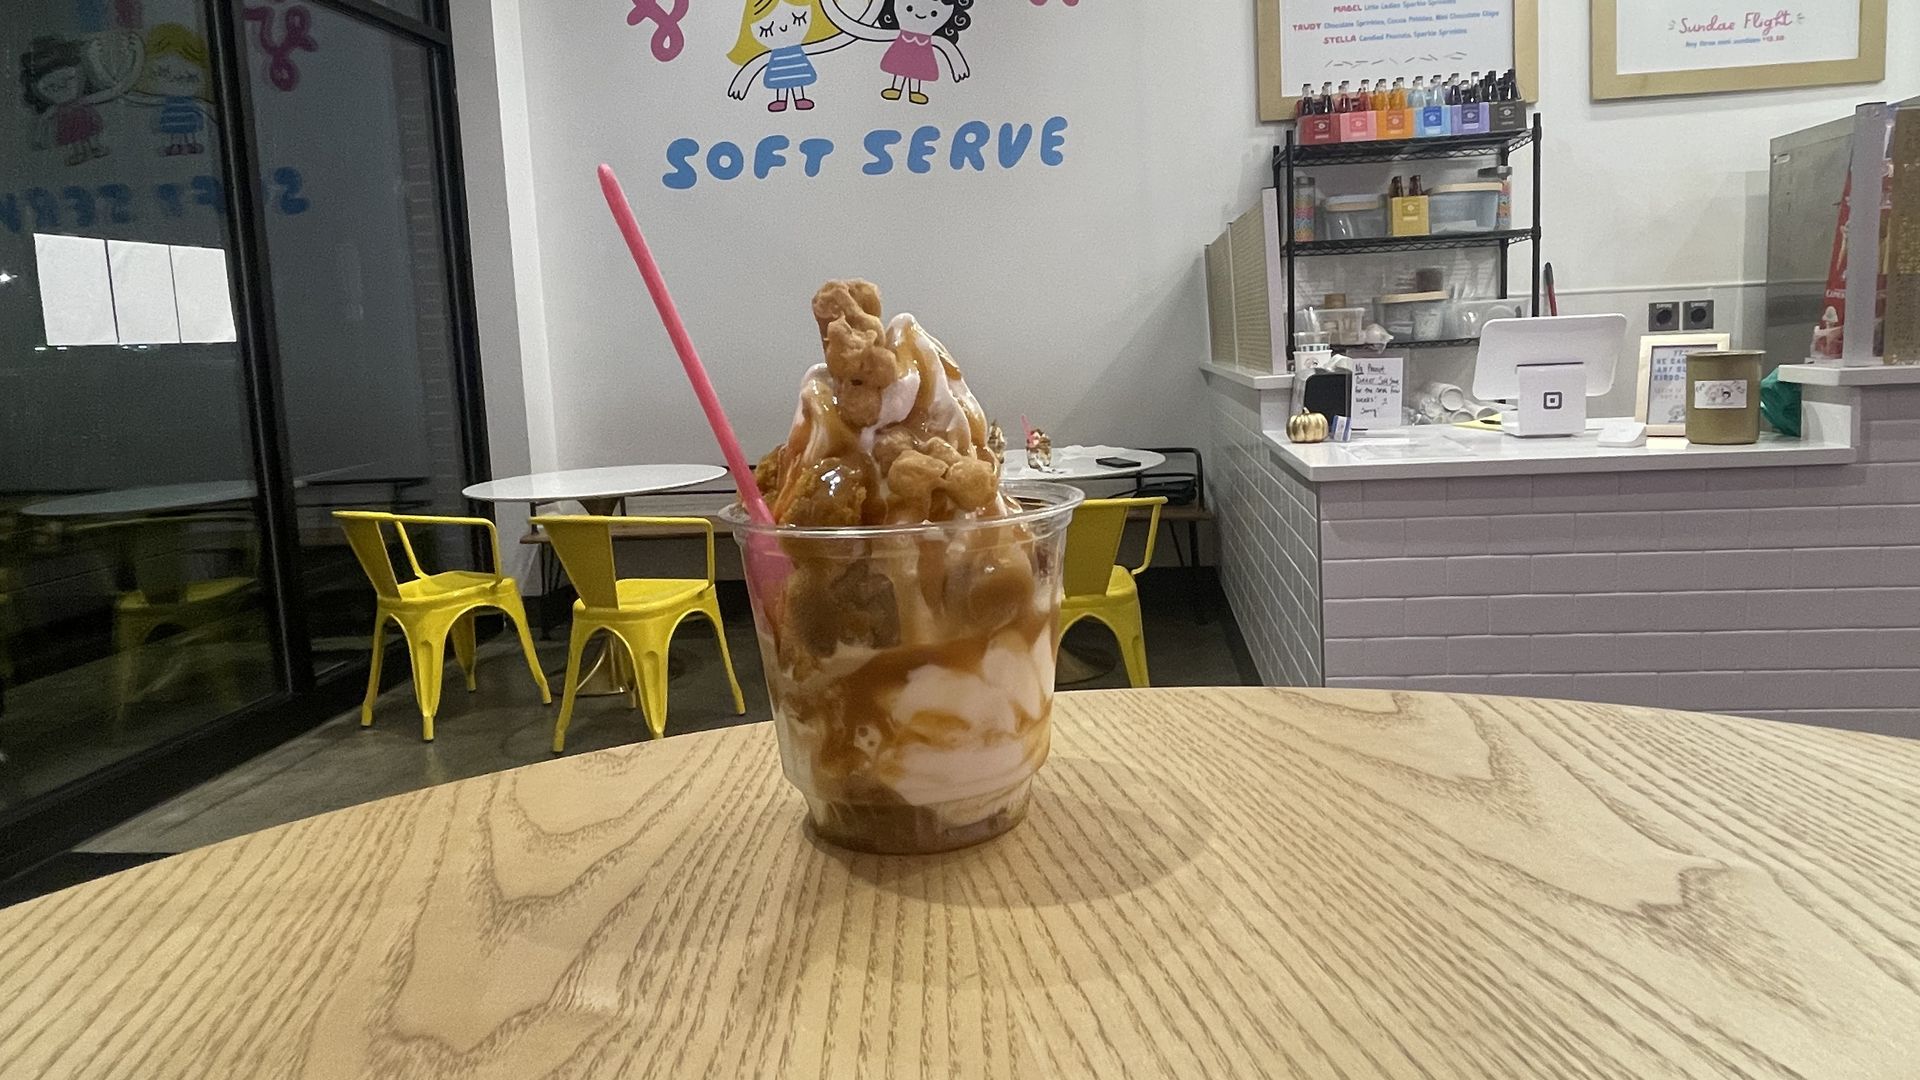 Photo of a sundae called "The Penny," a Little Ladies latest seasonal sundae featuring fall flavors of pumpkin and chai, topped with cardamom caramel sauce and homemade corn puff brittle